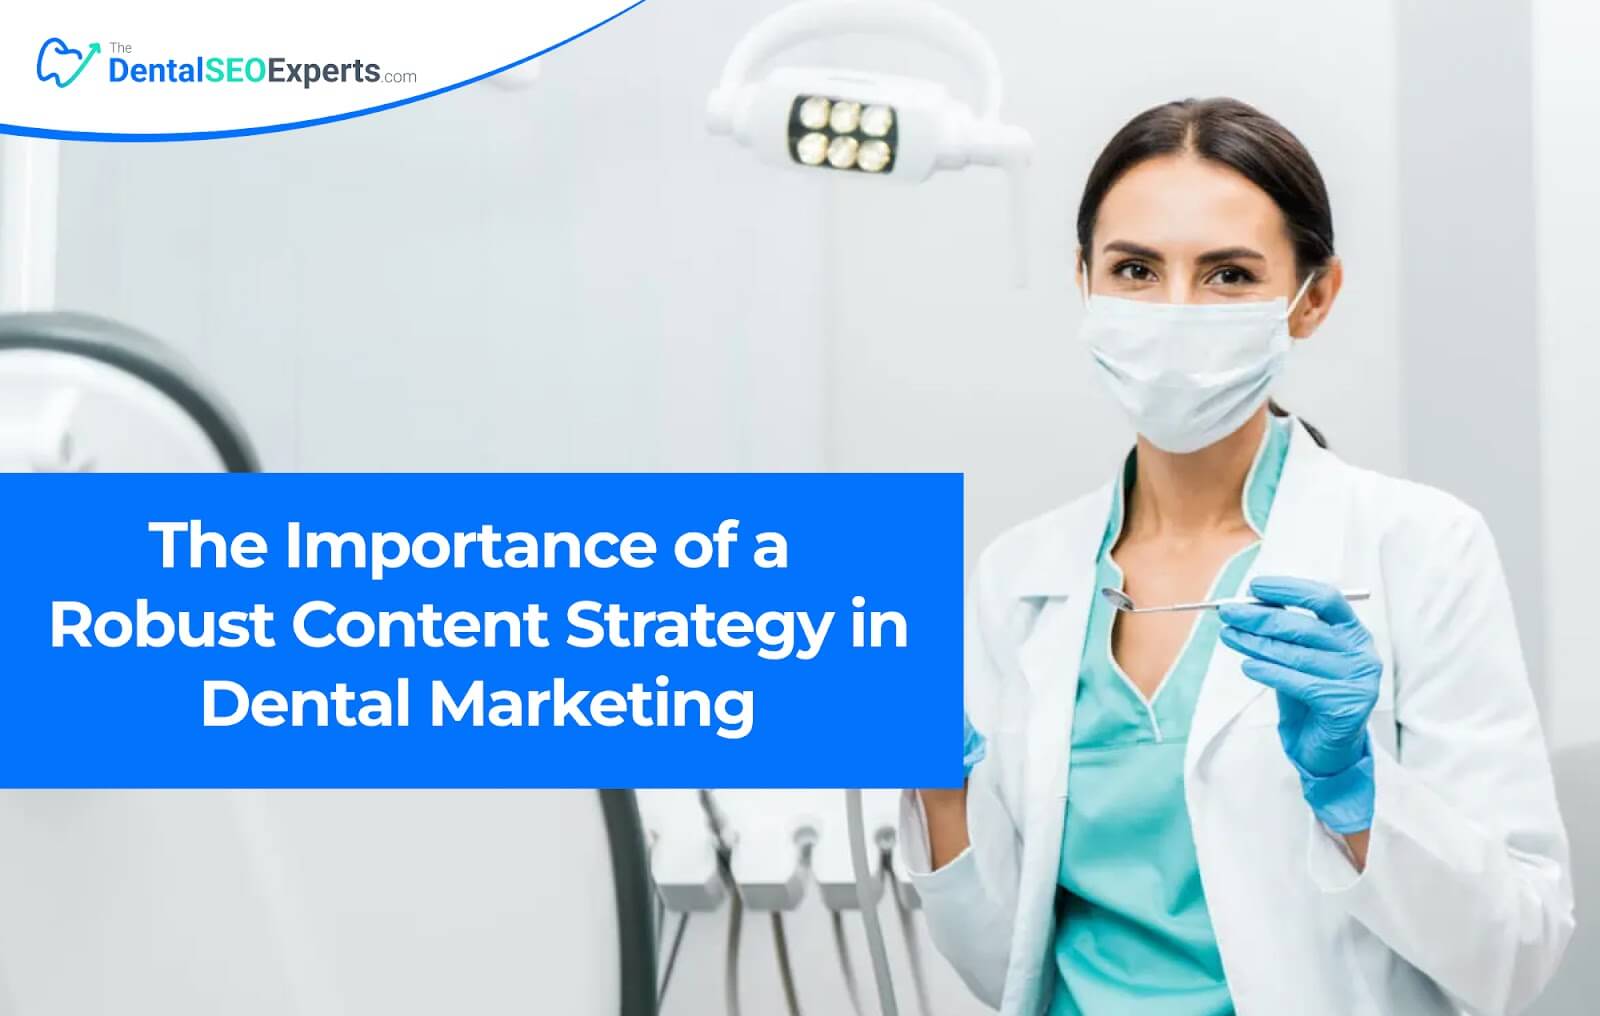 The Importance of a Robust Content Strategy in Dental Marketing